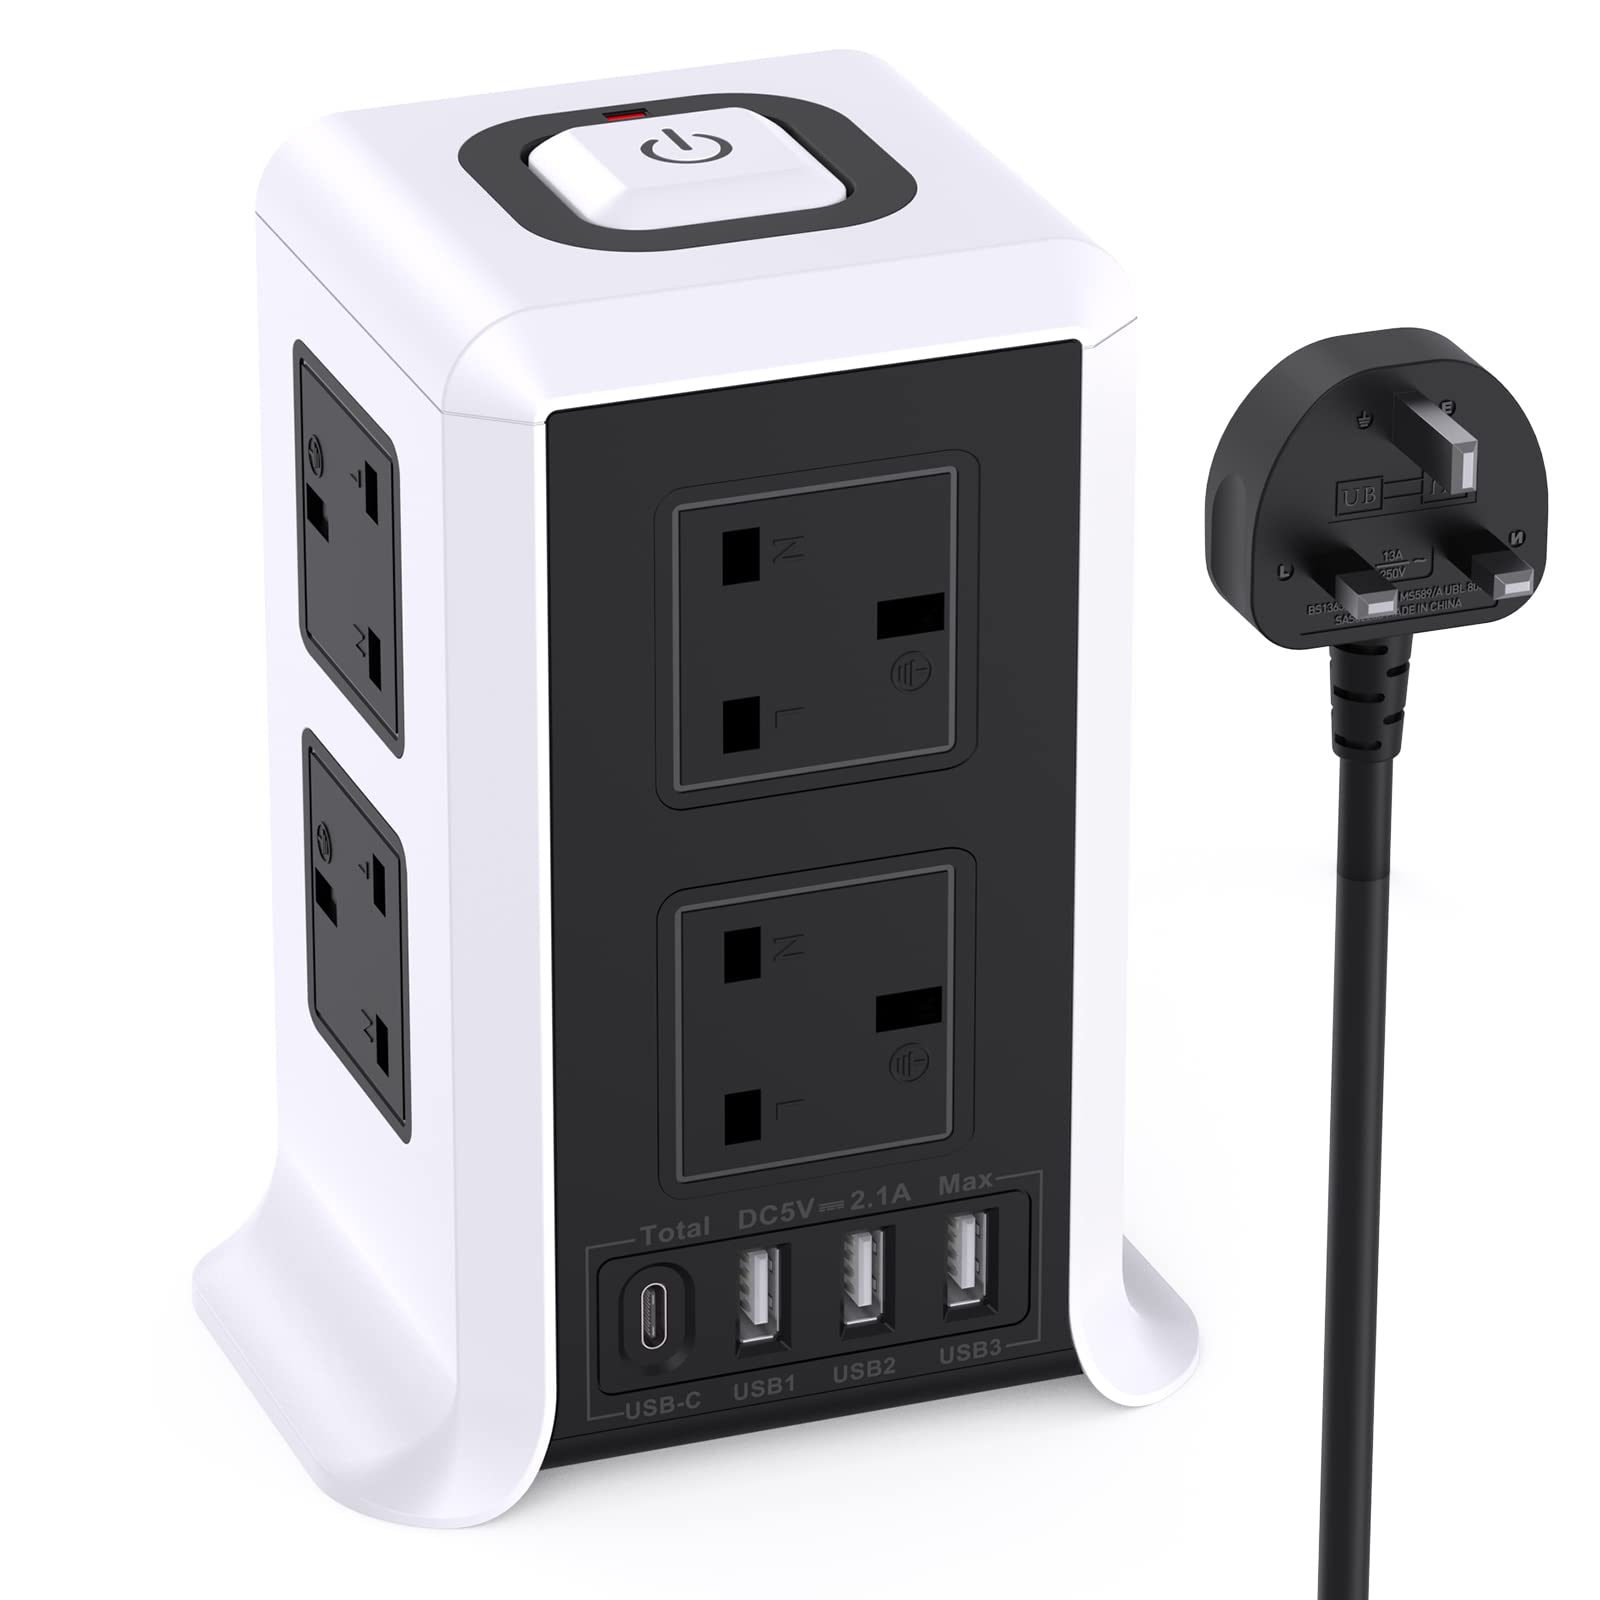 Extension Lead with USB Slots, 3USB-A and 1 Type-C Port and 8 Outlets Surge Protector Extension Lead, Tower Charing Station for Home and Office, White